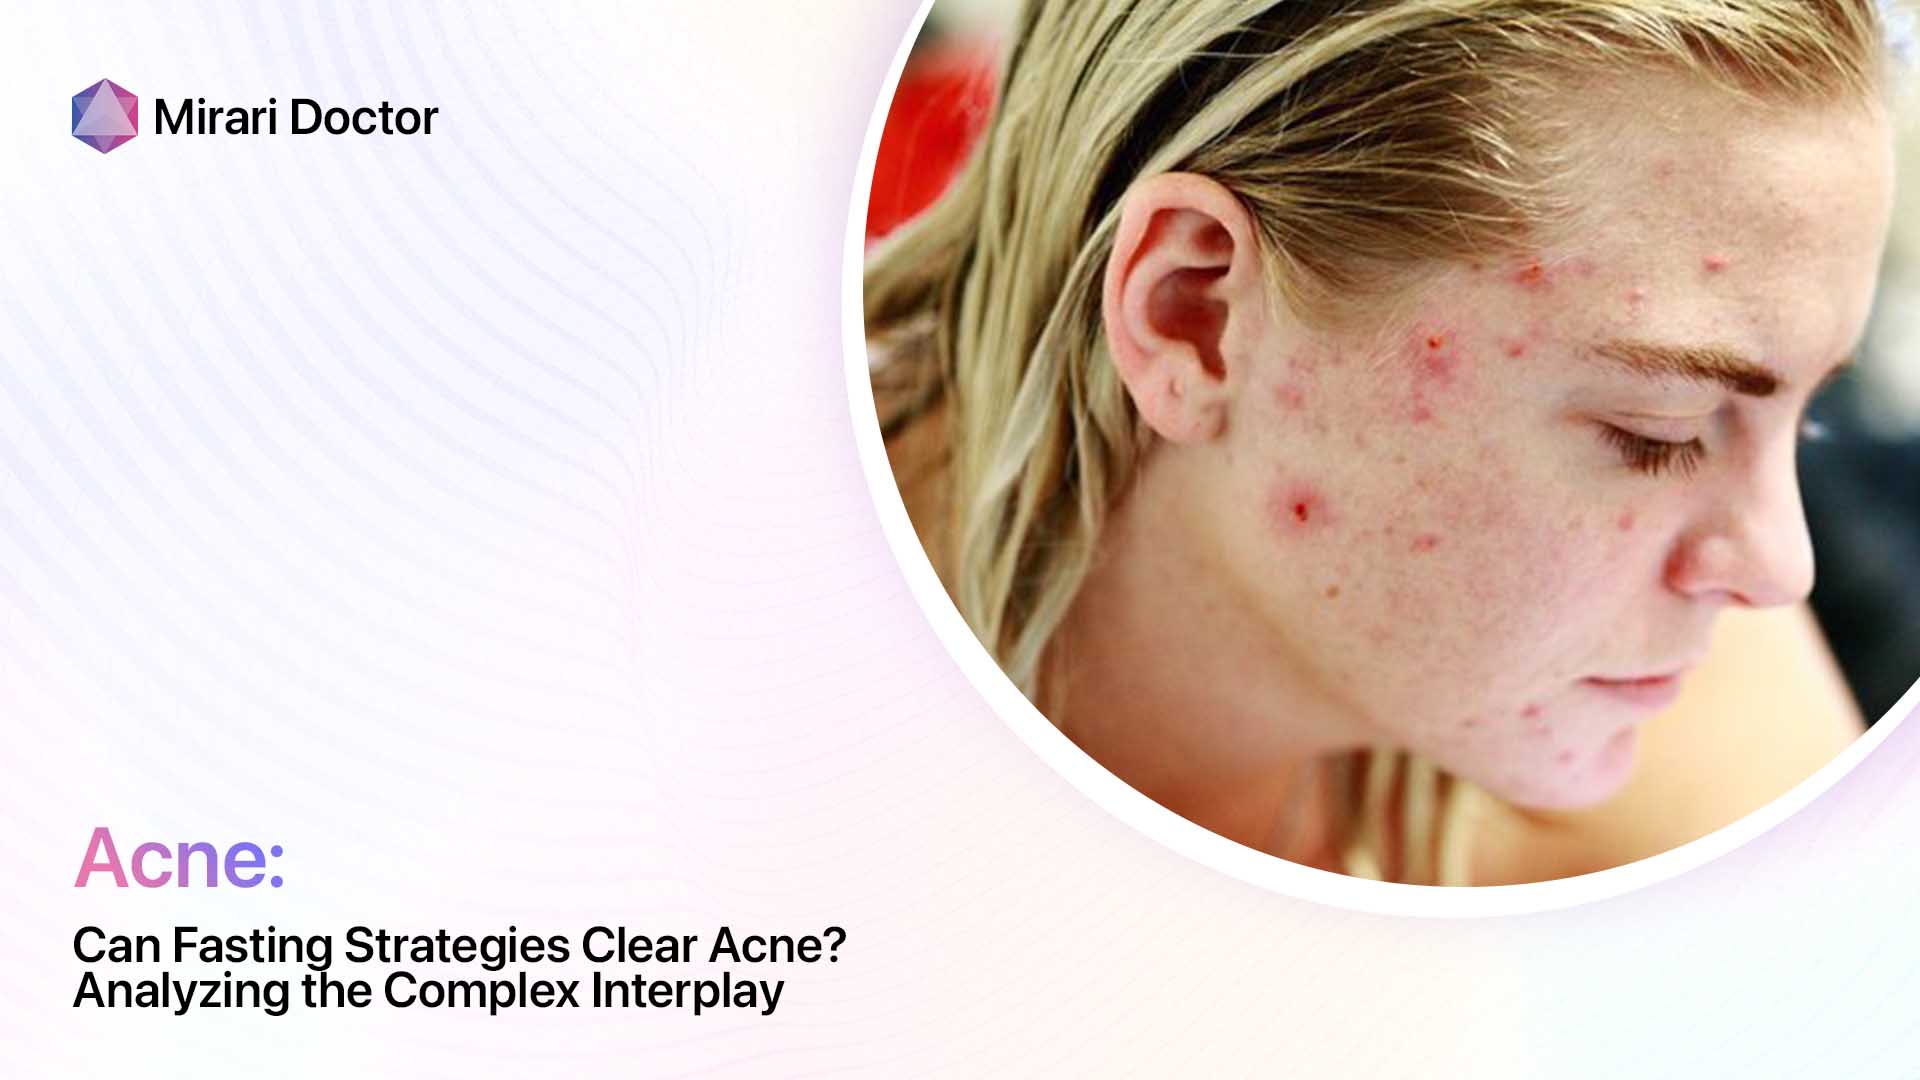 Can Fasting Strategies Clear Acne? Analyzing the Complex Interplay